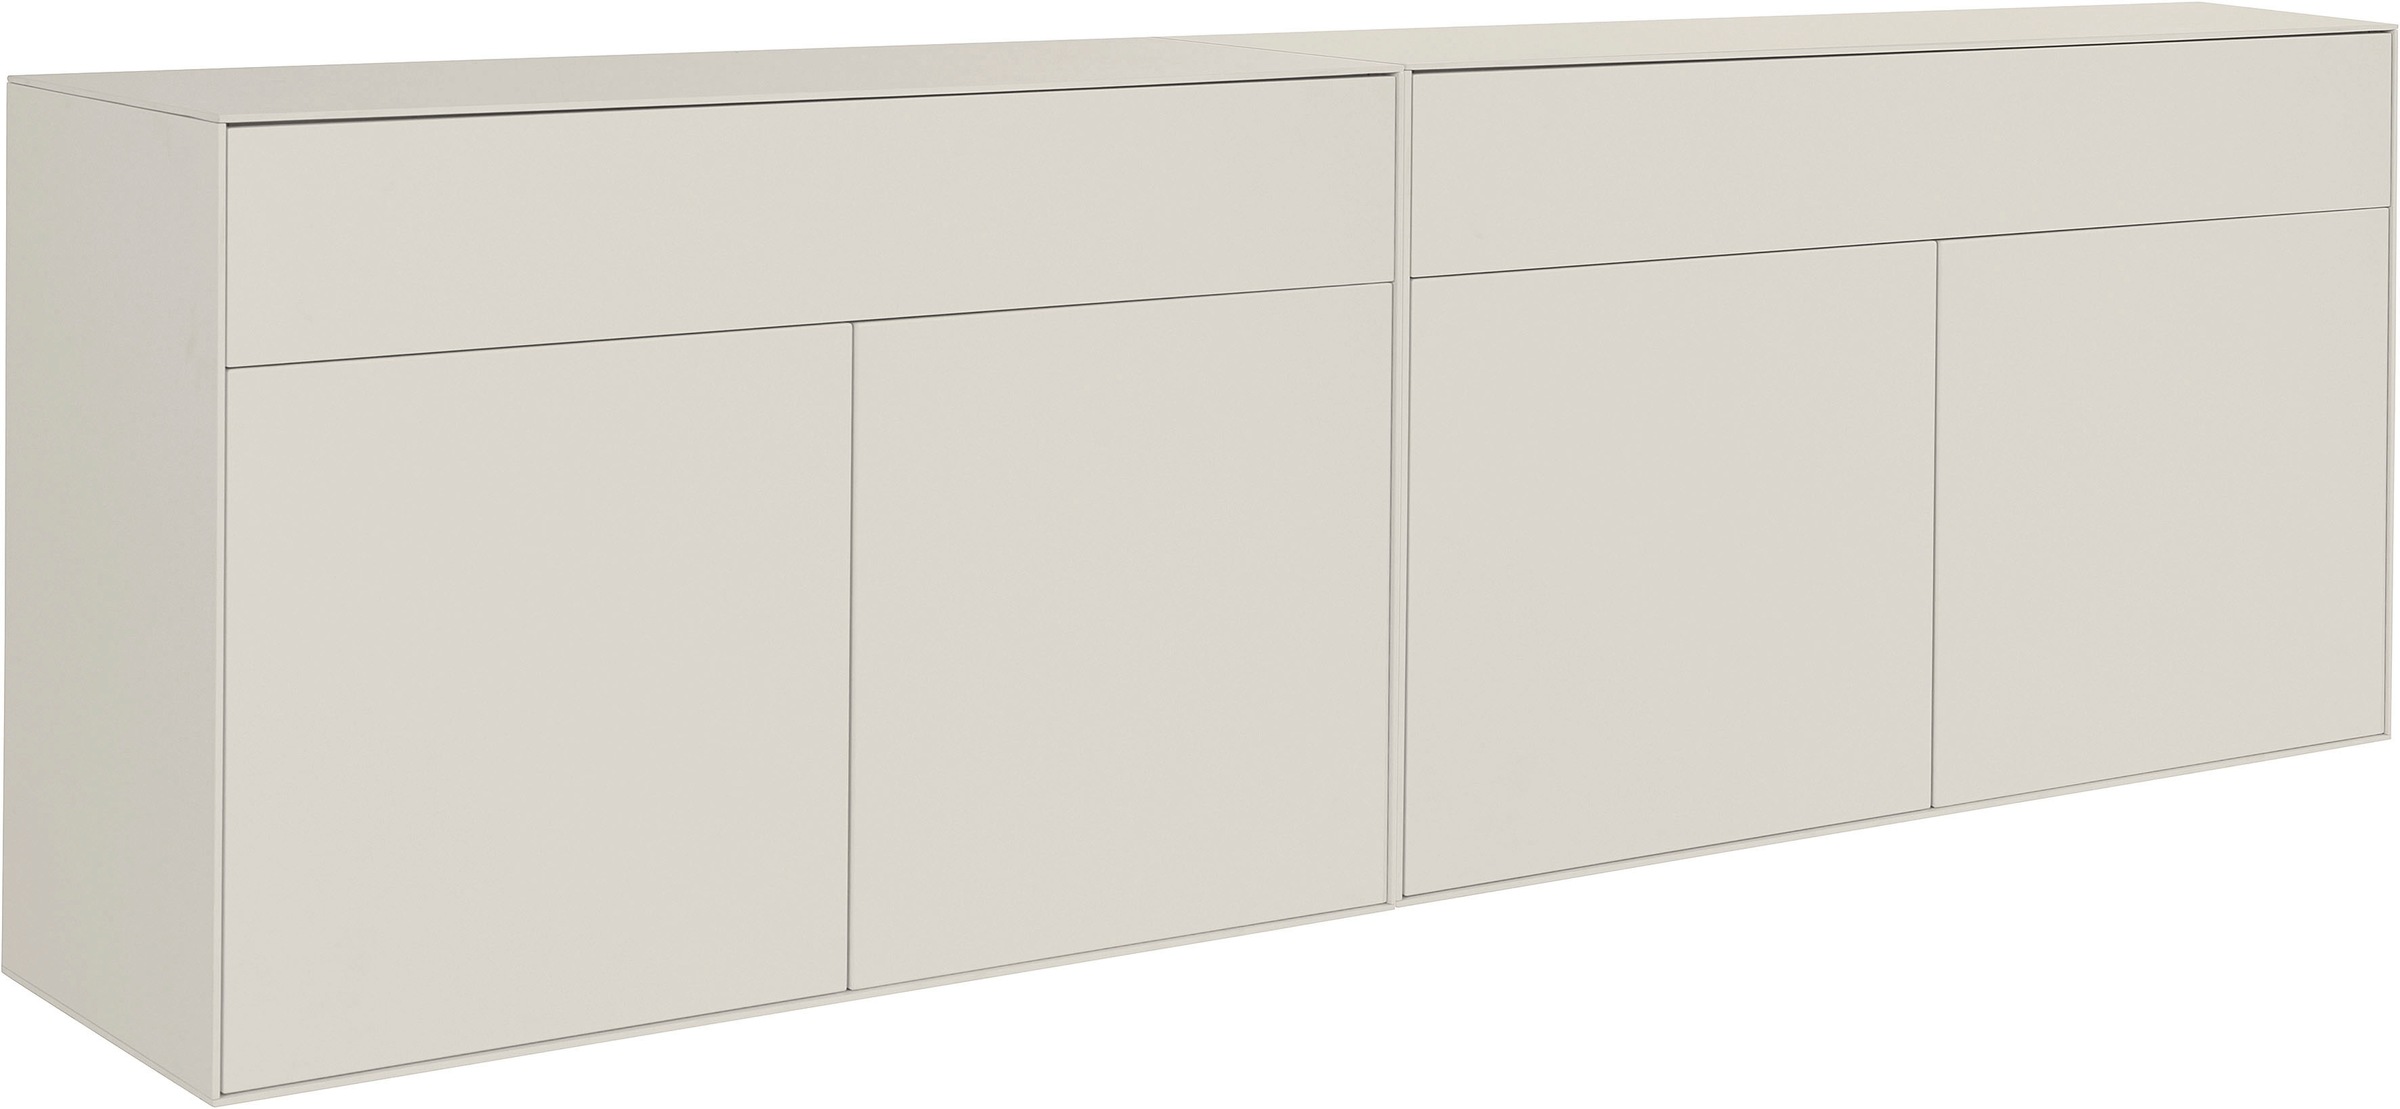 LeGer Home by Lena Gercke Sideboard »Essentials«, (2 St.), Breite: 224cm, MDF lackiert, Push-to-open-Funktion